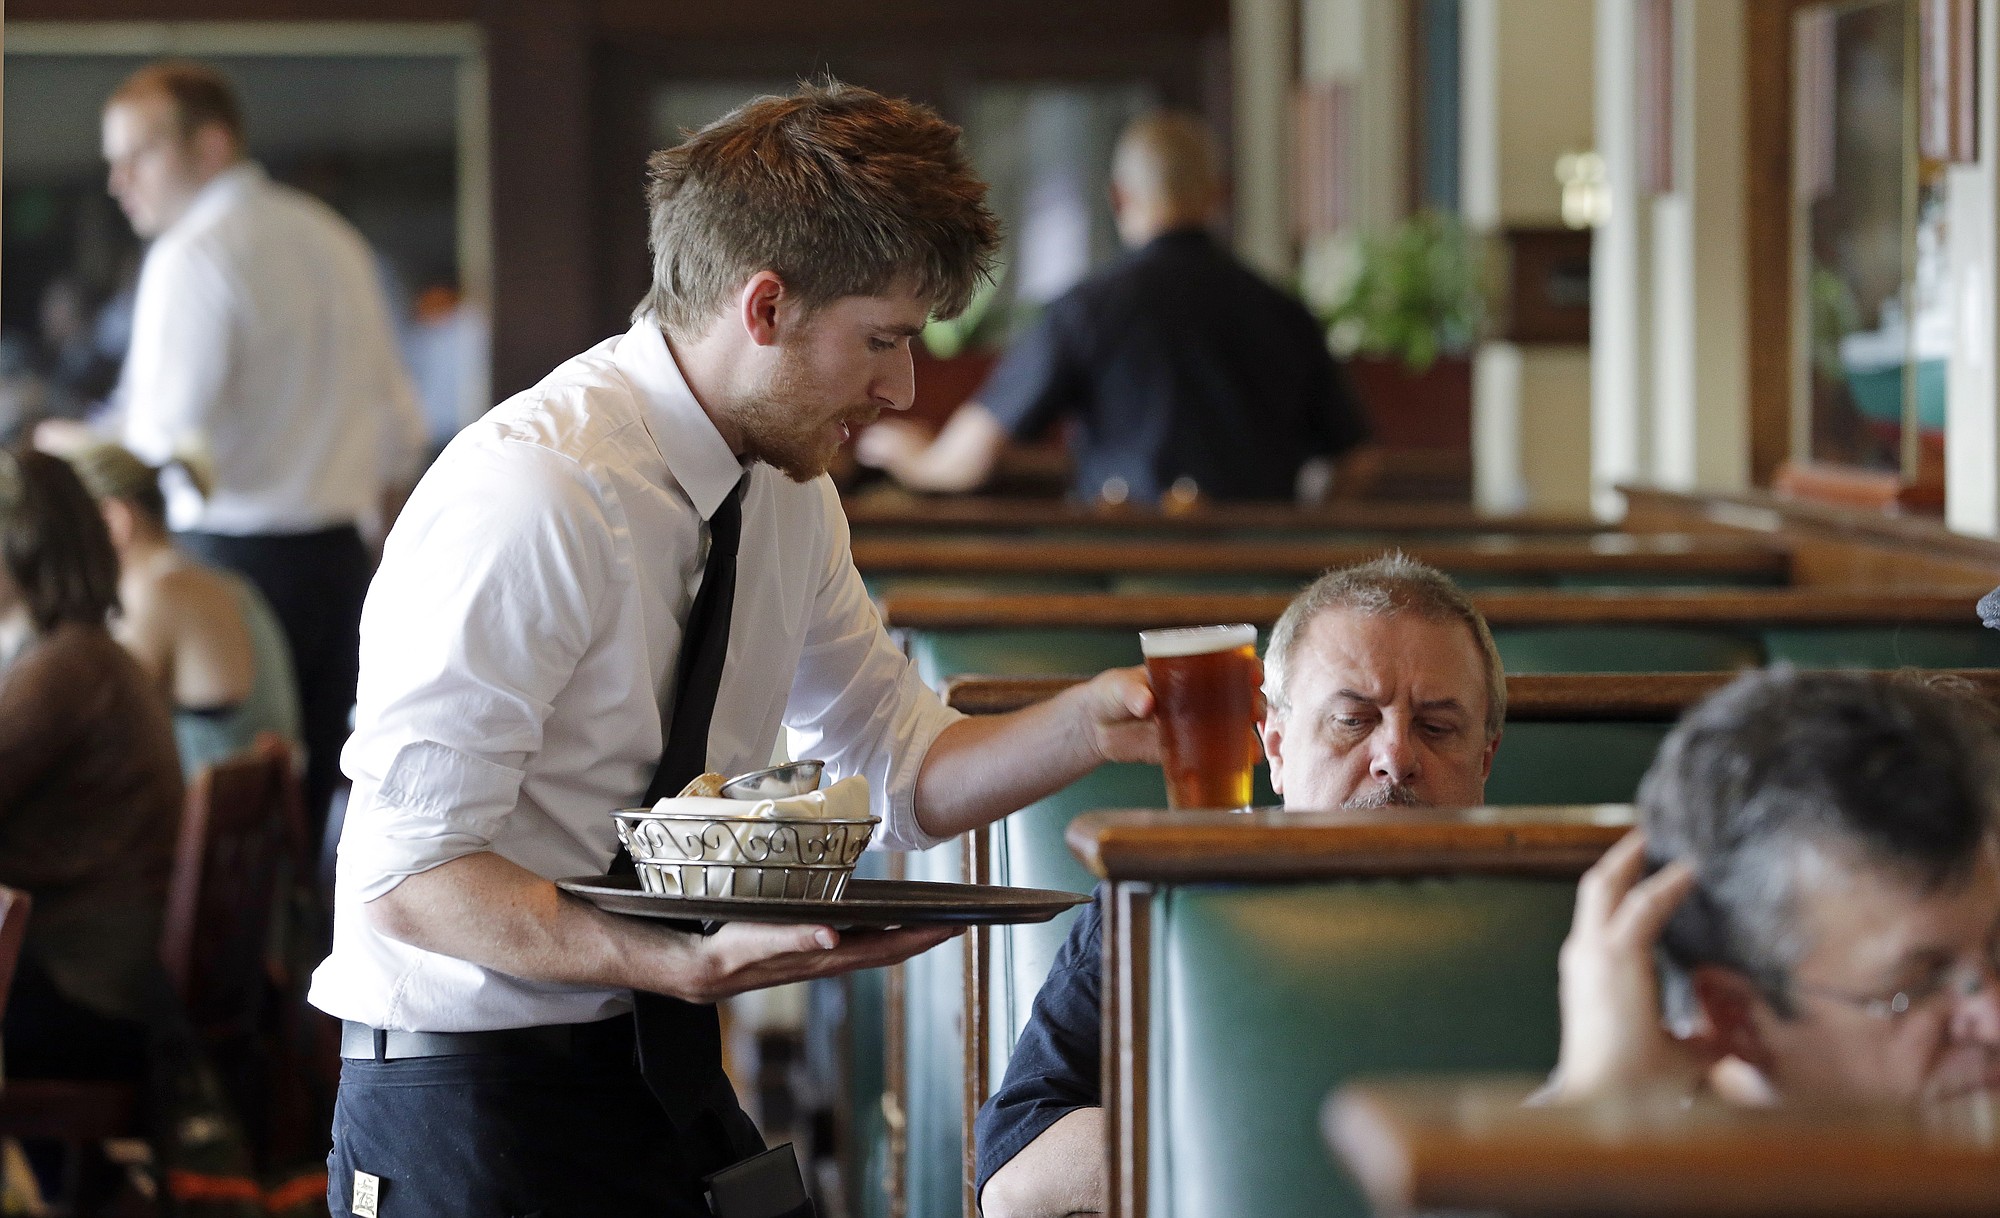 Waiter Spencer Meline serves a customer at Ivar's Acres of Clams restaurant on the Seattle waterfront.